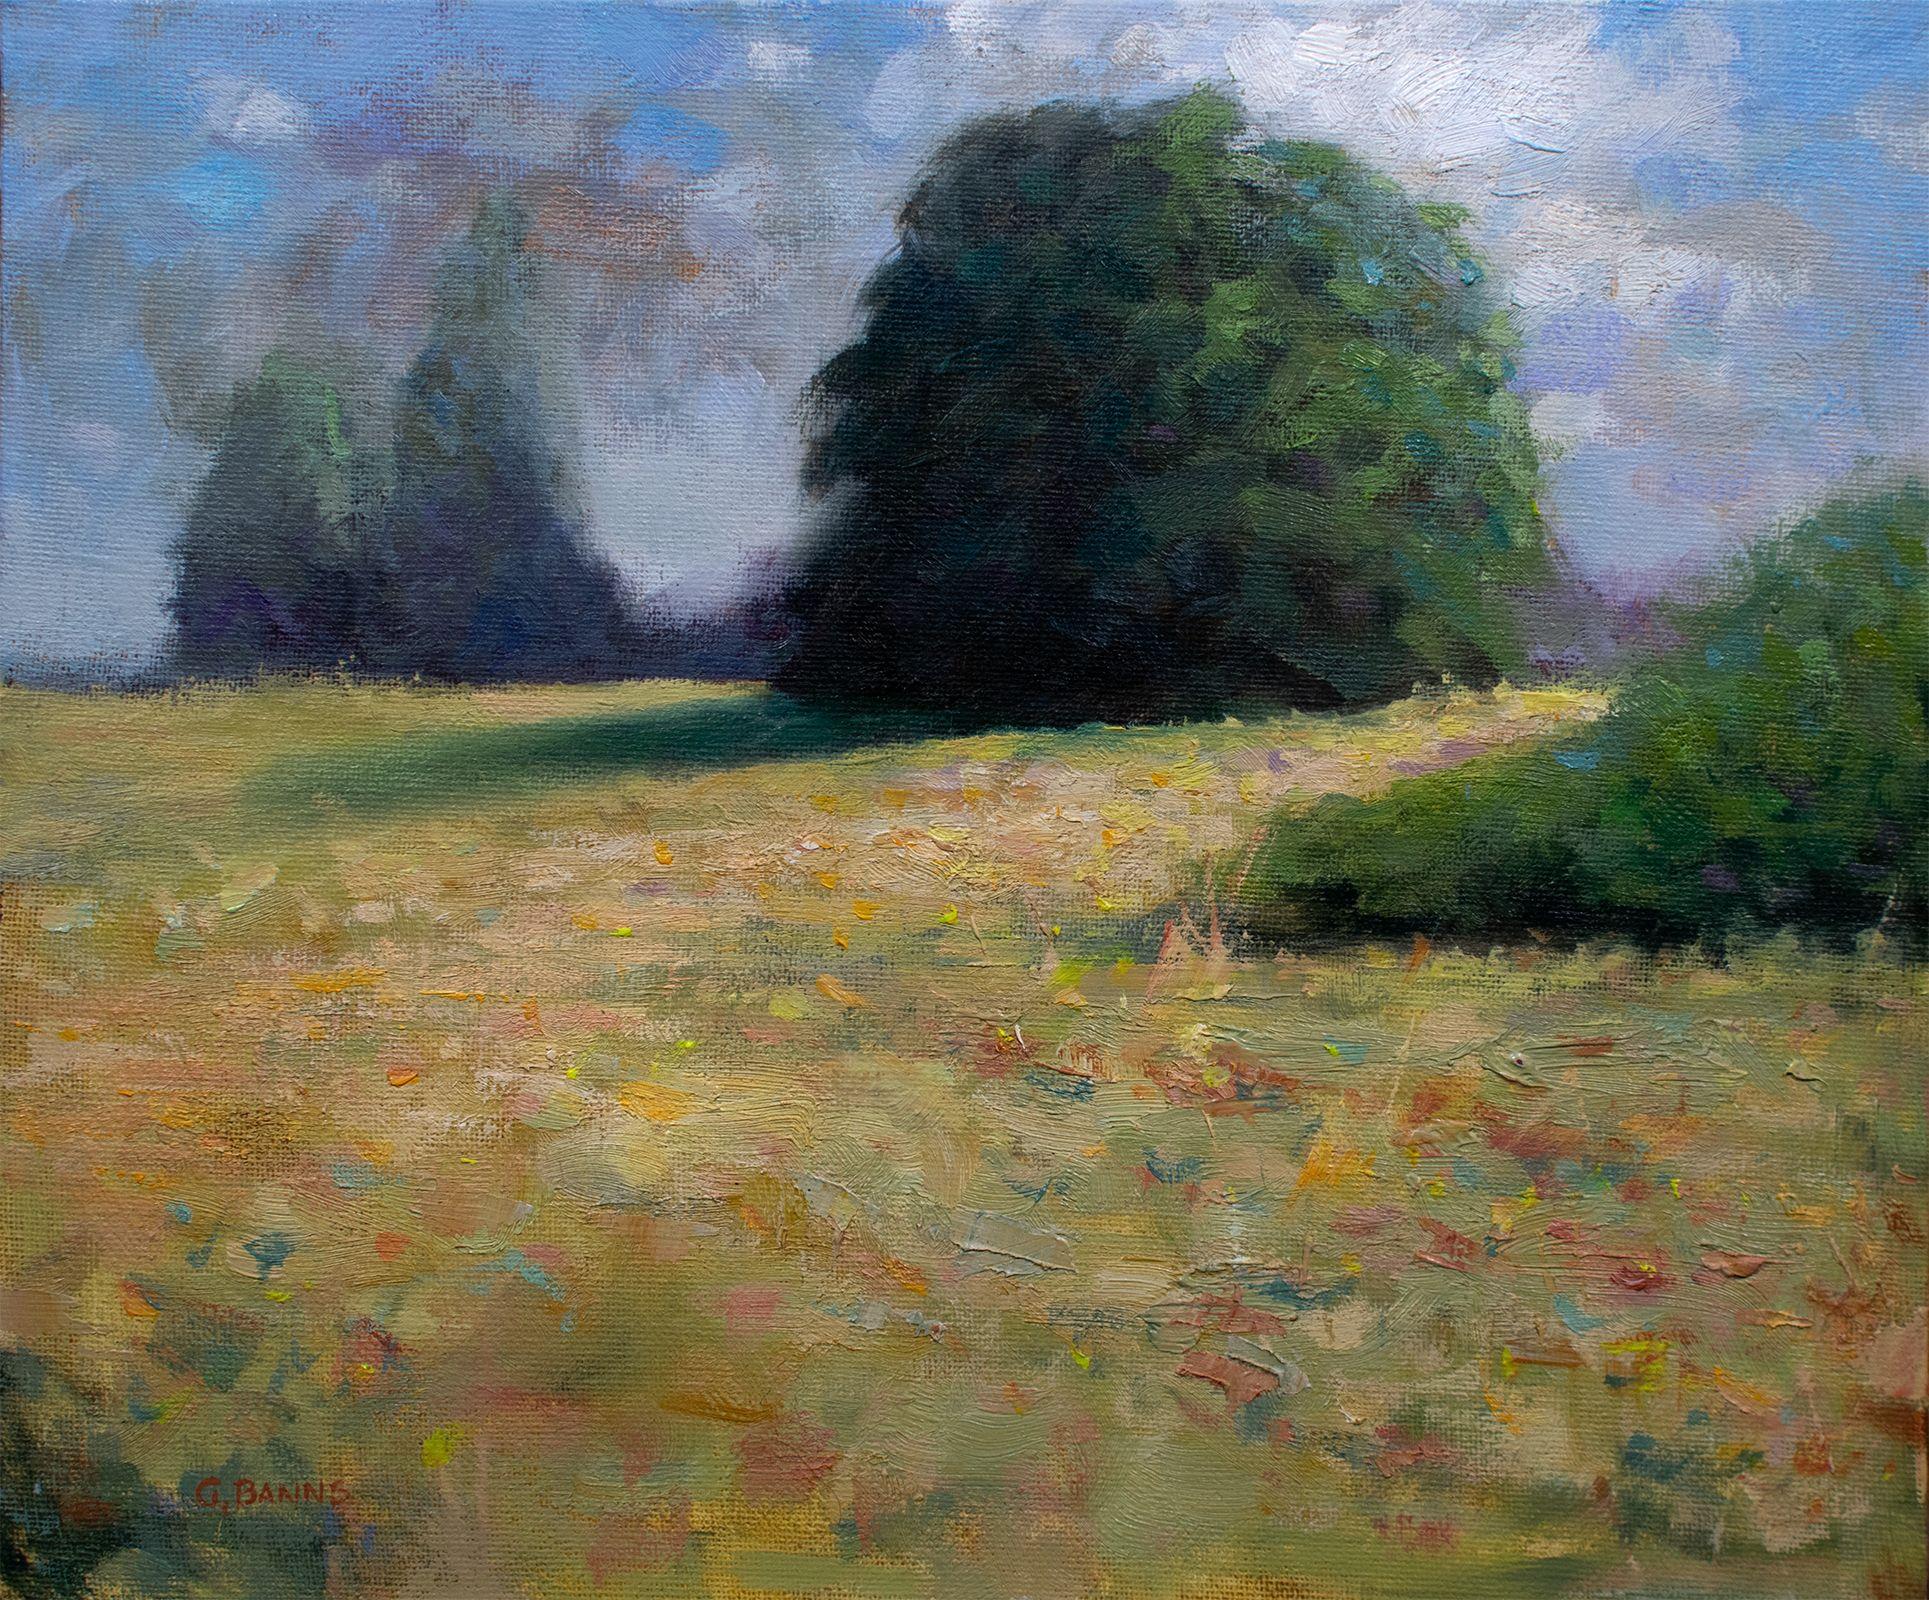 This is a scene from a nearby field, in quite a untamed part of Western France. I liked the interplay of light over the wild grasses and flowers, contrasting to the deeper shadows of the trees. It's painted in an impressionist style on canvasboard,